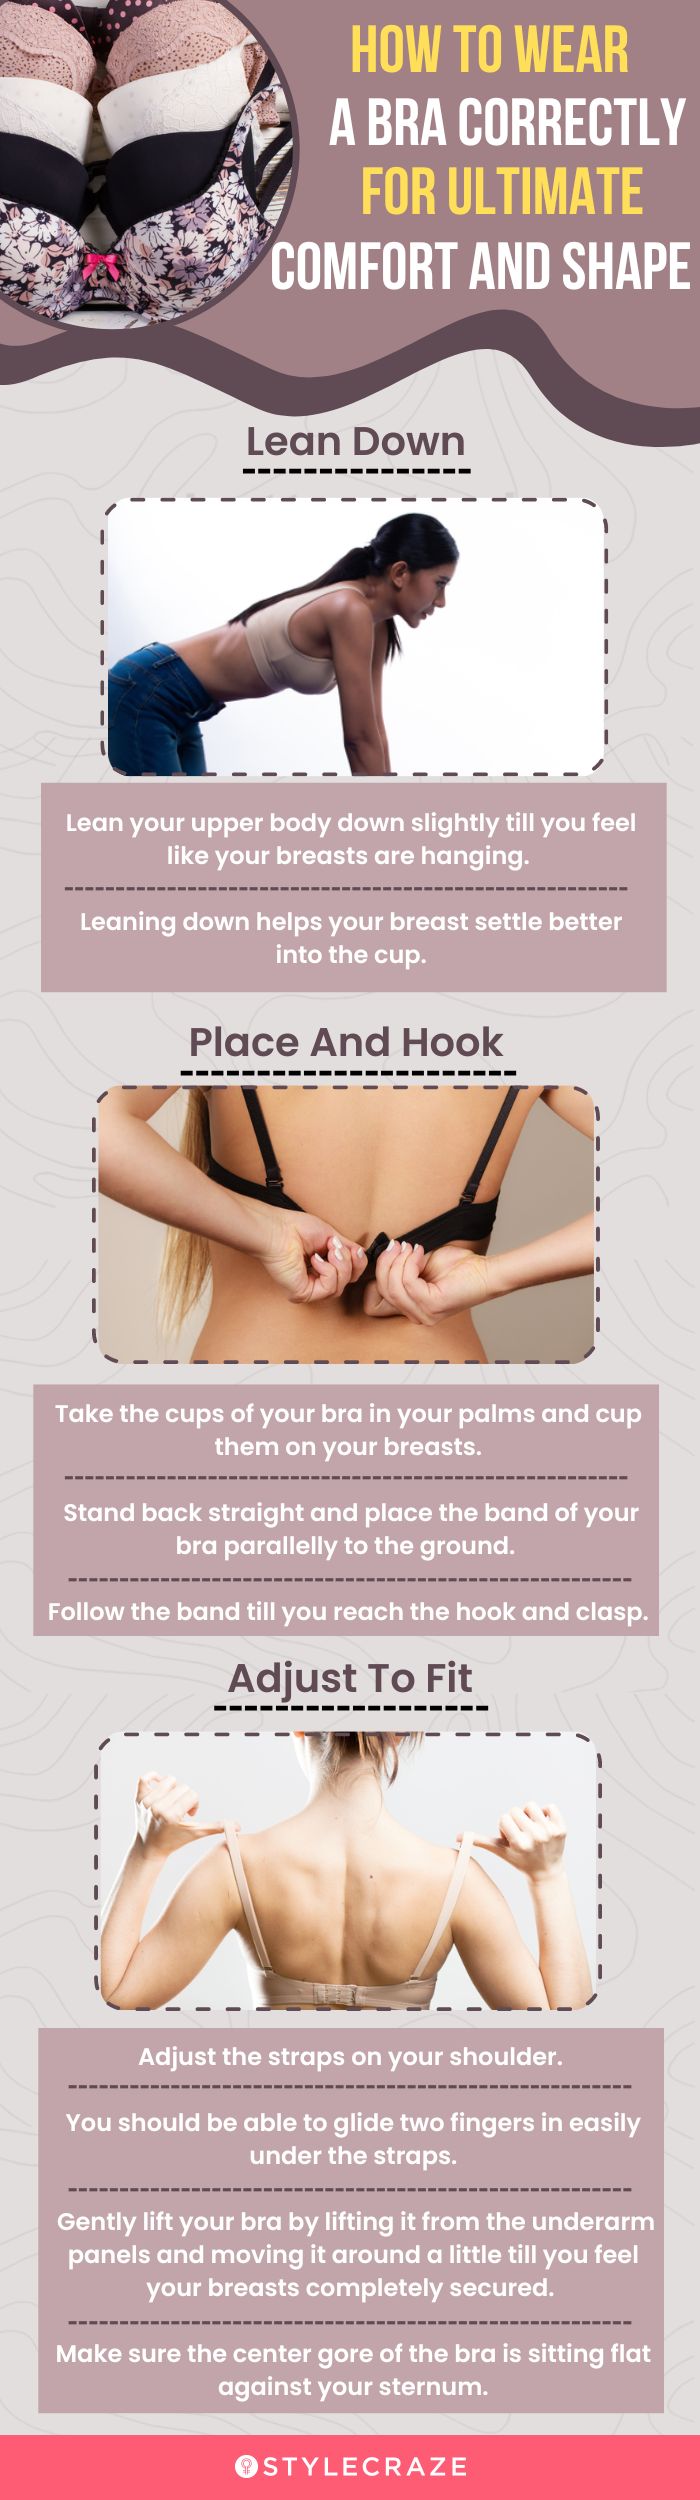 How To Wear A Bra Correctly For Ultimate Comfort And Shape (infographic)